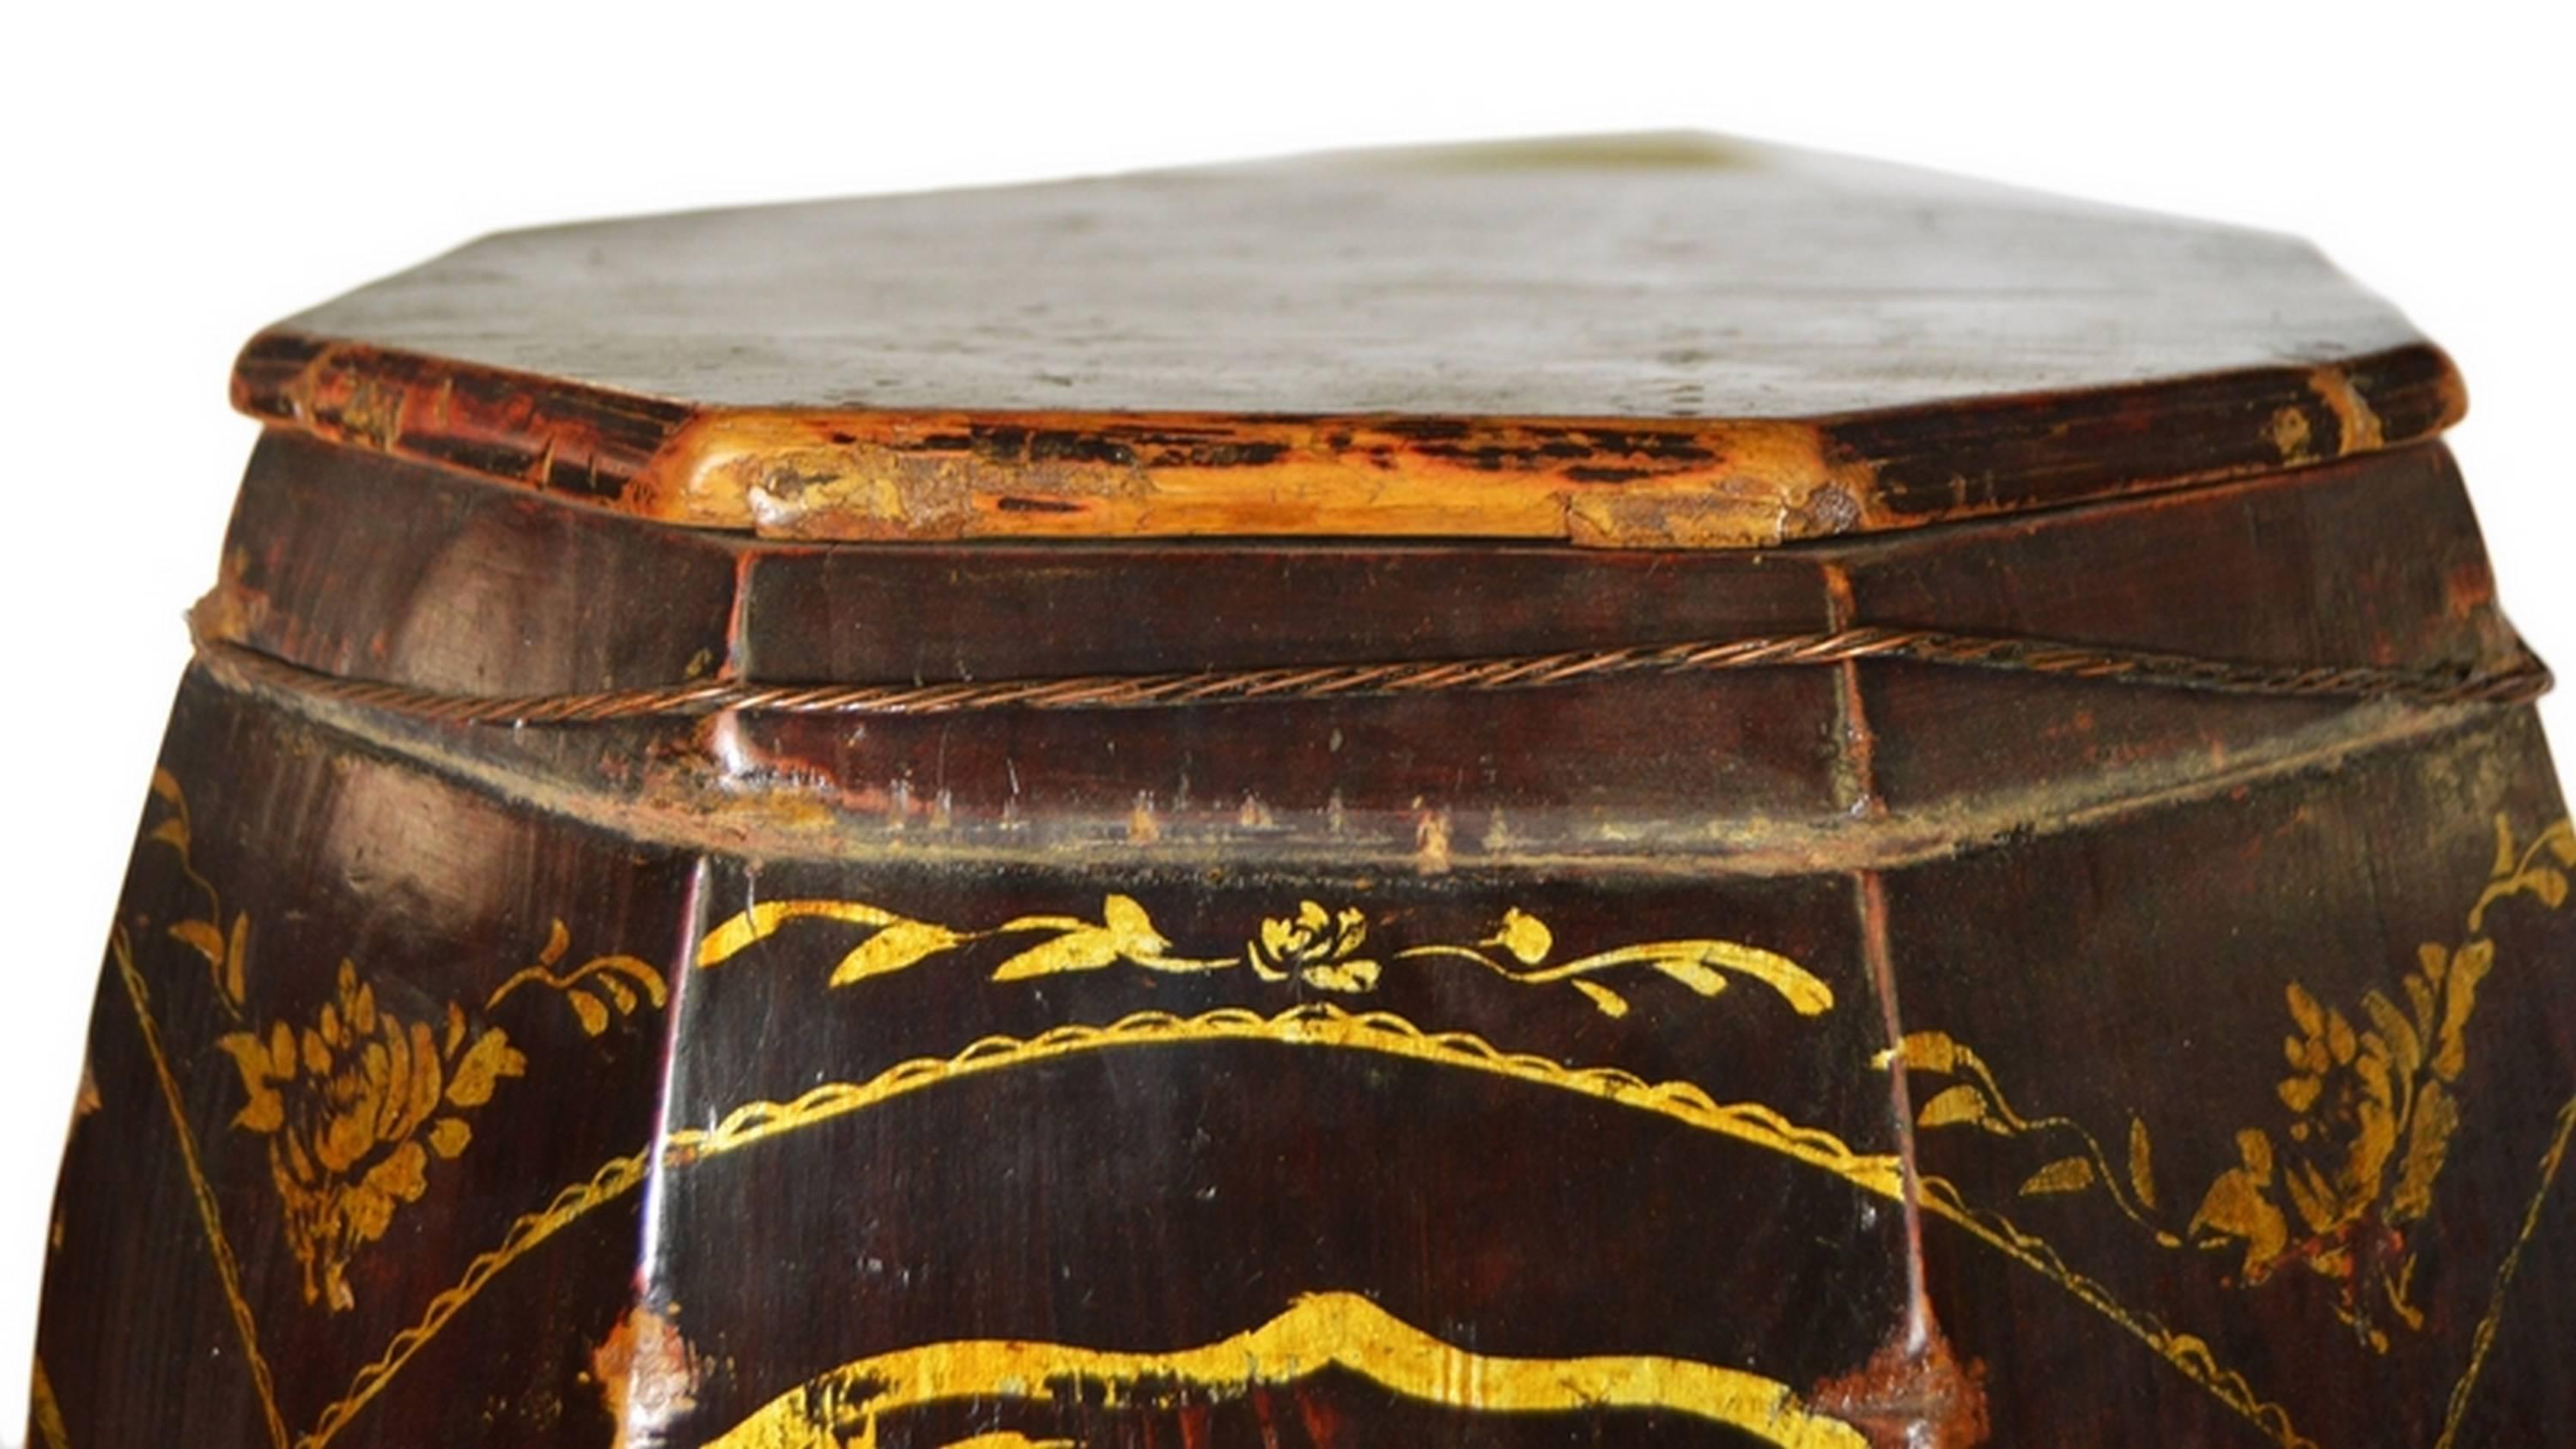 Chinese Hand-Painted Grain Storage Barrel with Medallions from, China, 19th Century